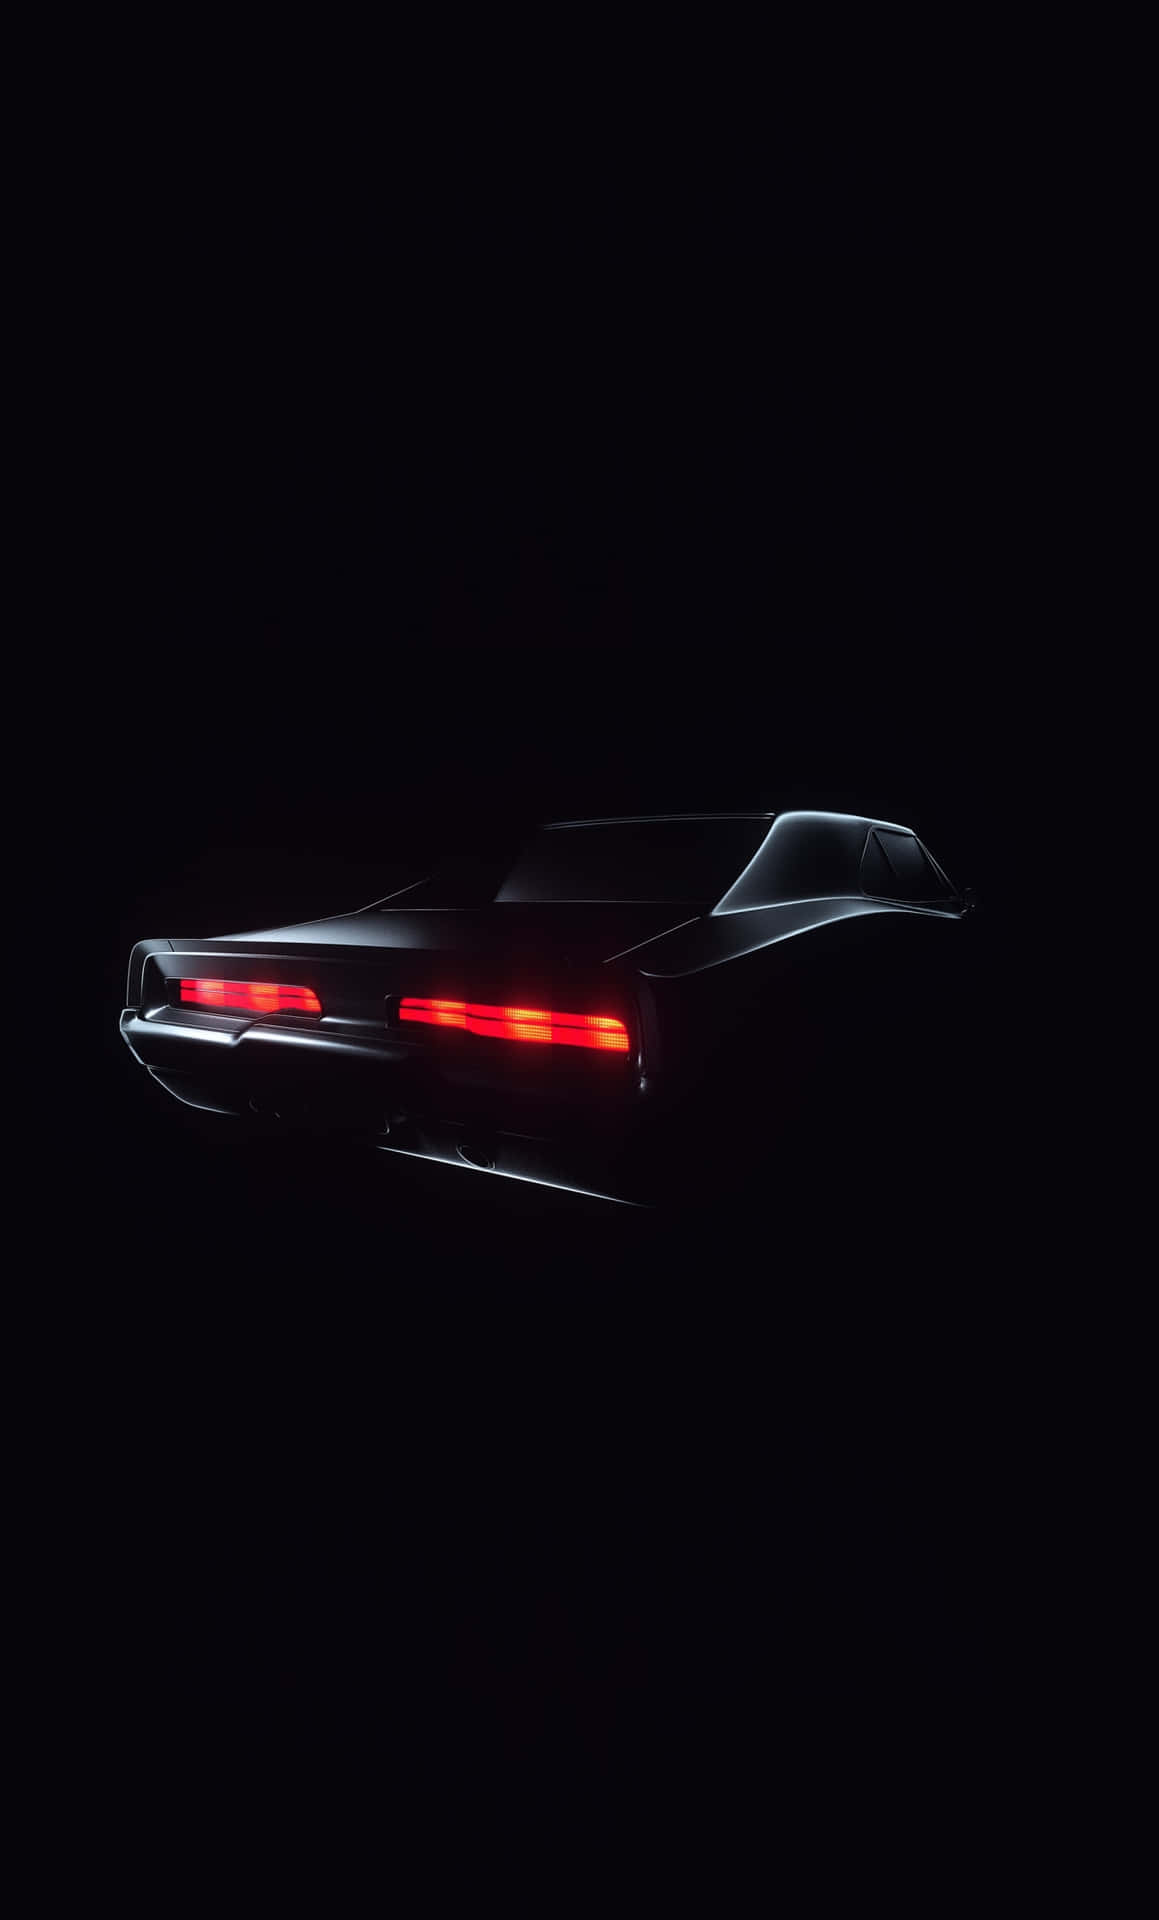 Take on the road with the powerful Dodge Charger on your Iphone Wallpaper